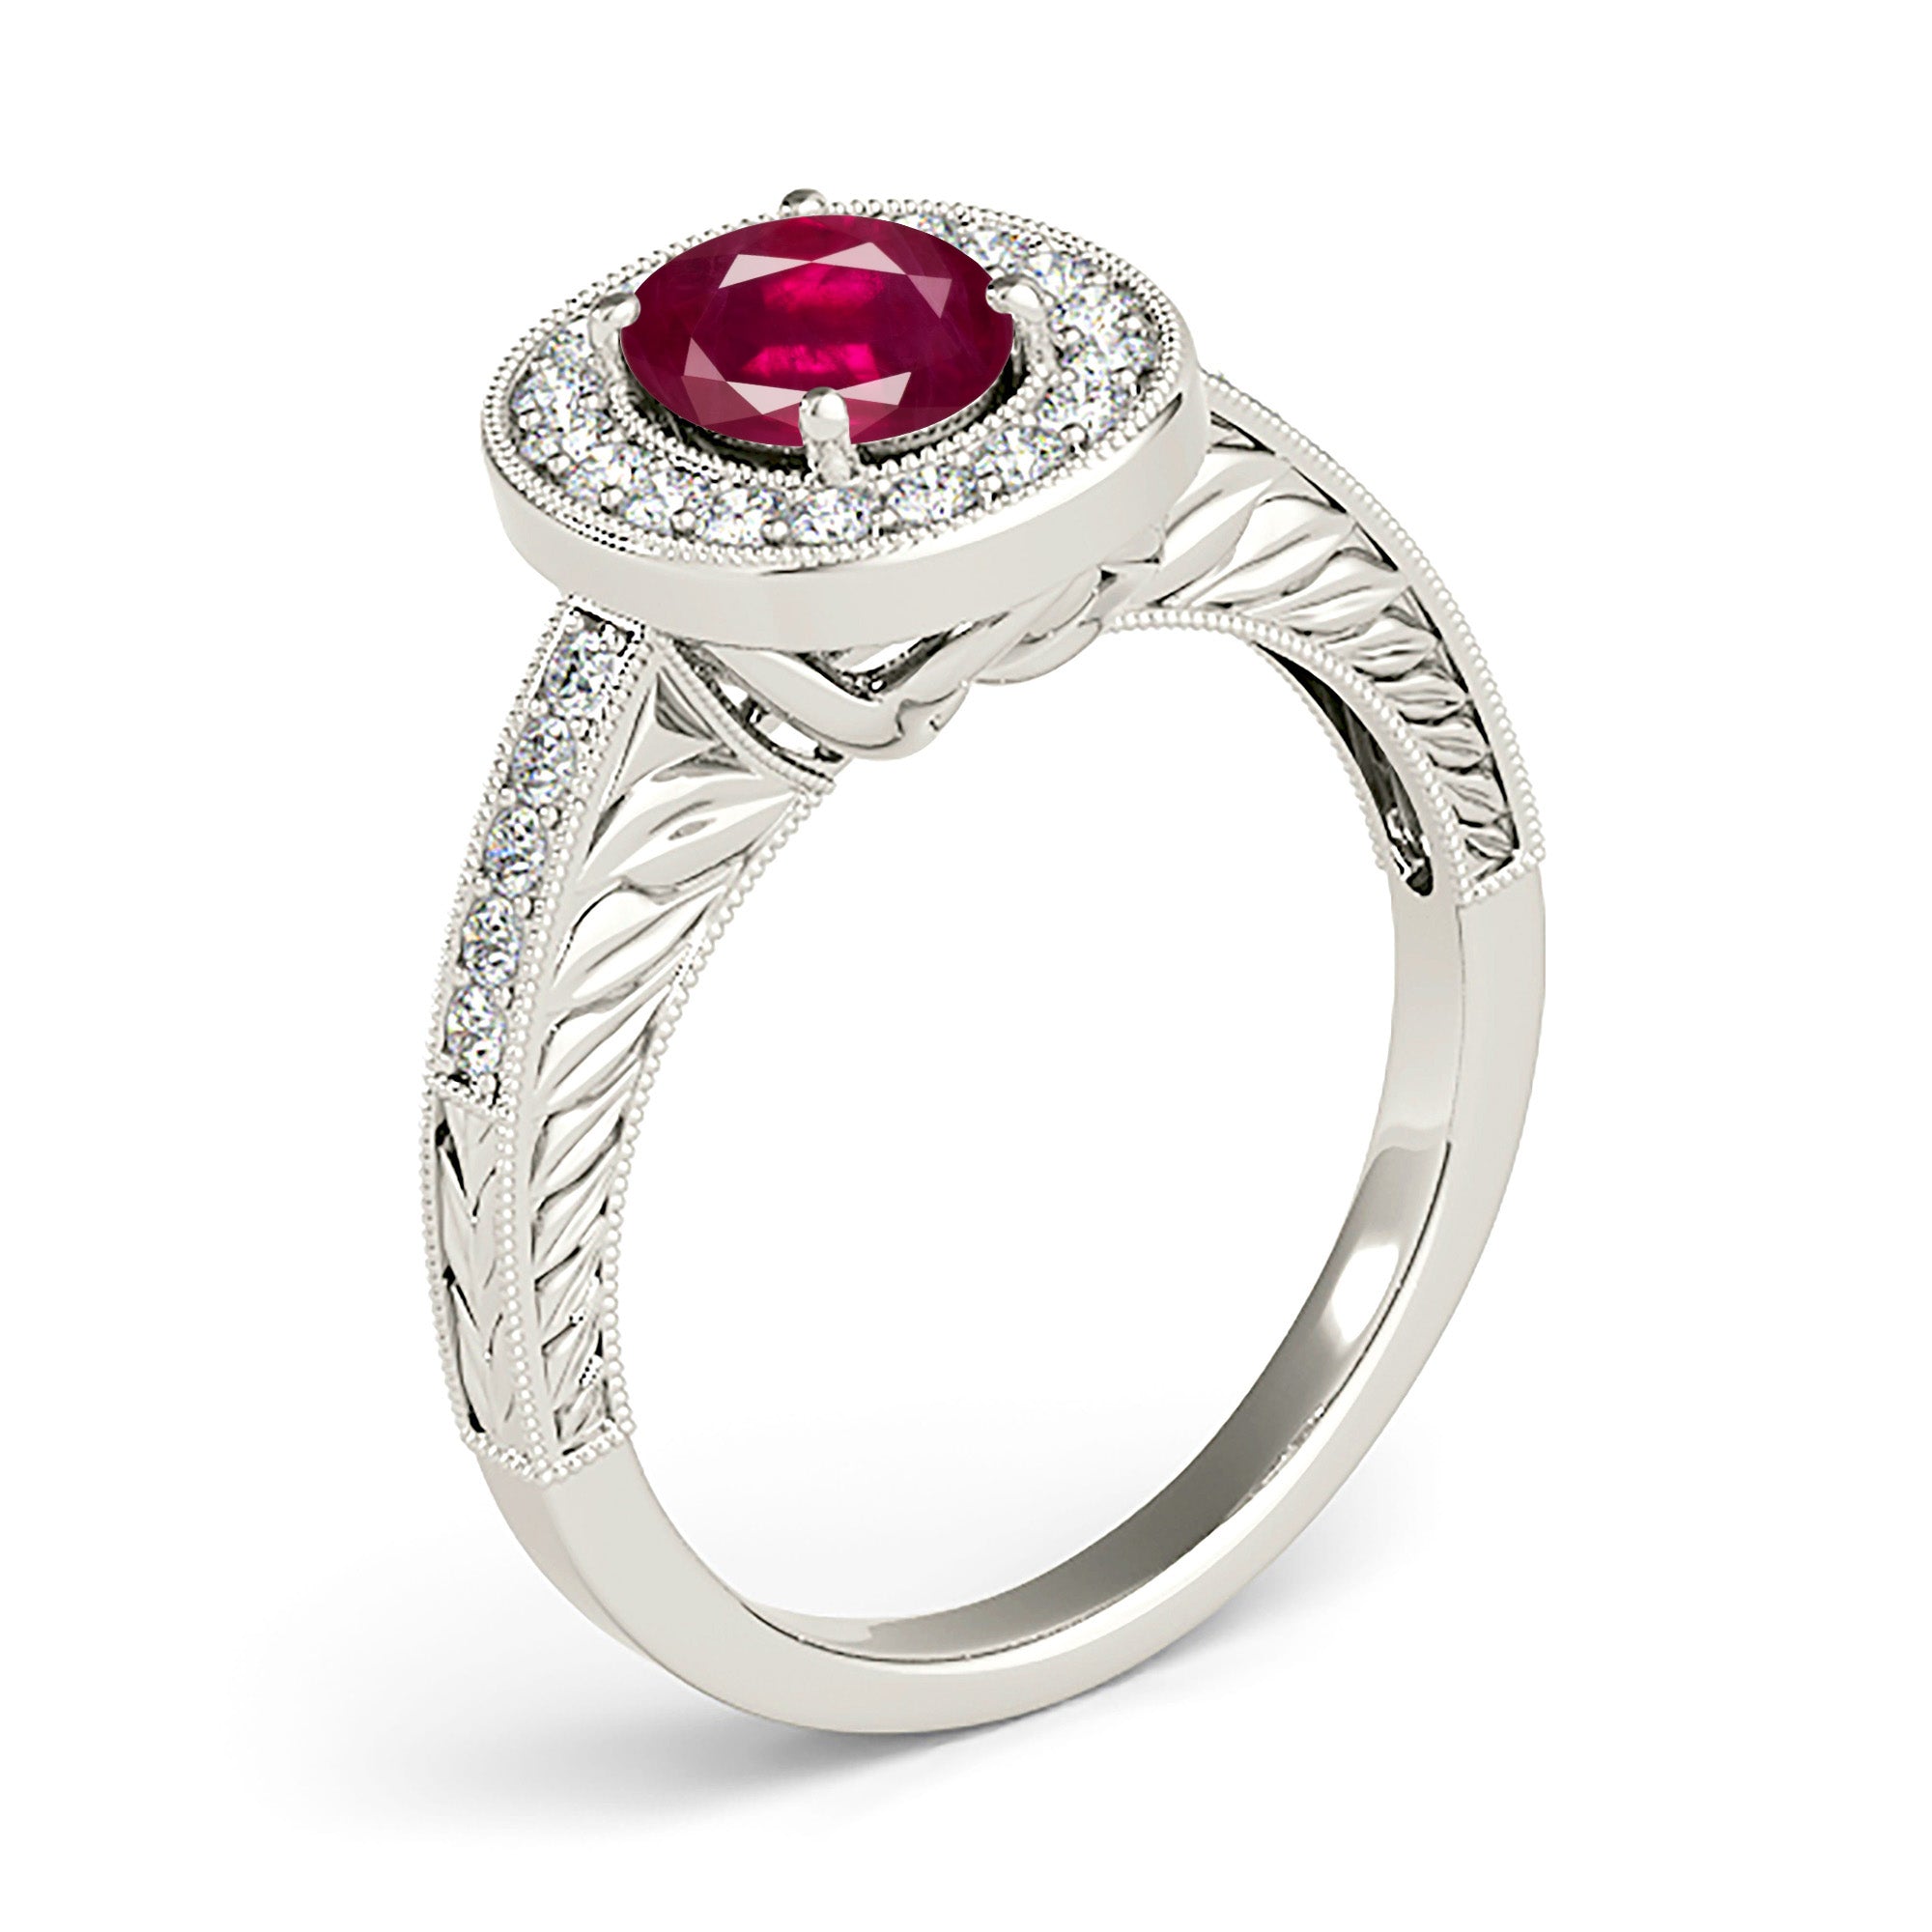 2.07 ct. Genuine Oval Ruby Ring with 0.35 ctw. Diamond Halo And Filigree Diamond Band-in 14K/18K White, Yellow, Rose Gold and Platinum - Christmas Jewelry Gift -VIRABYANI